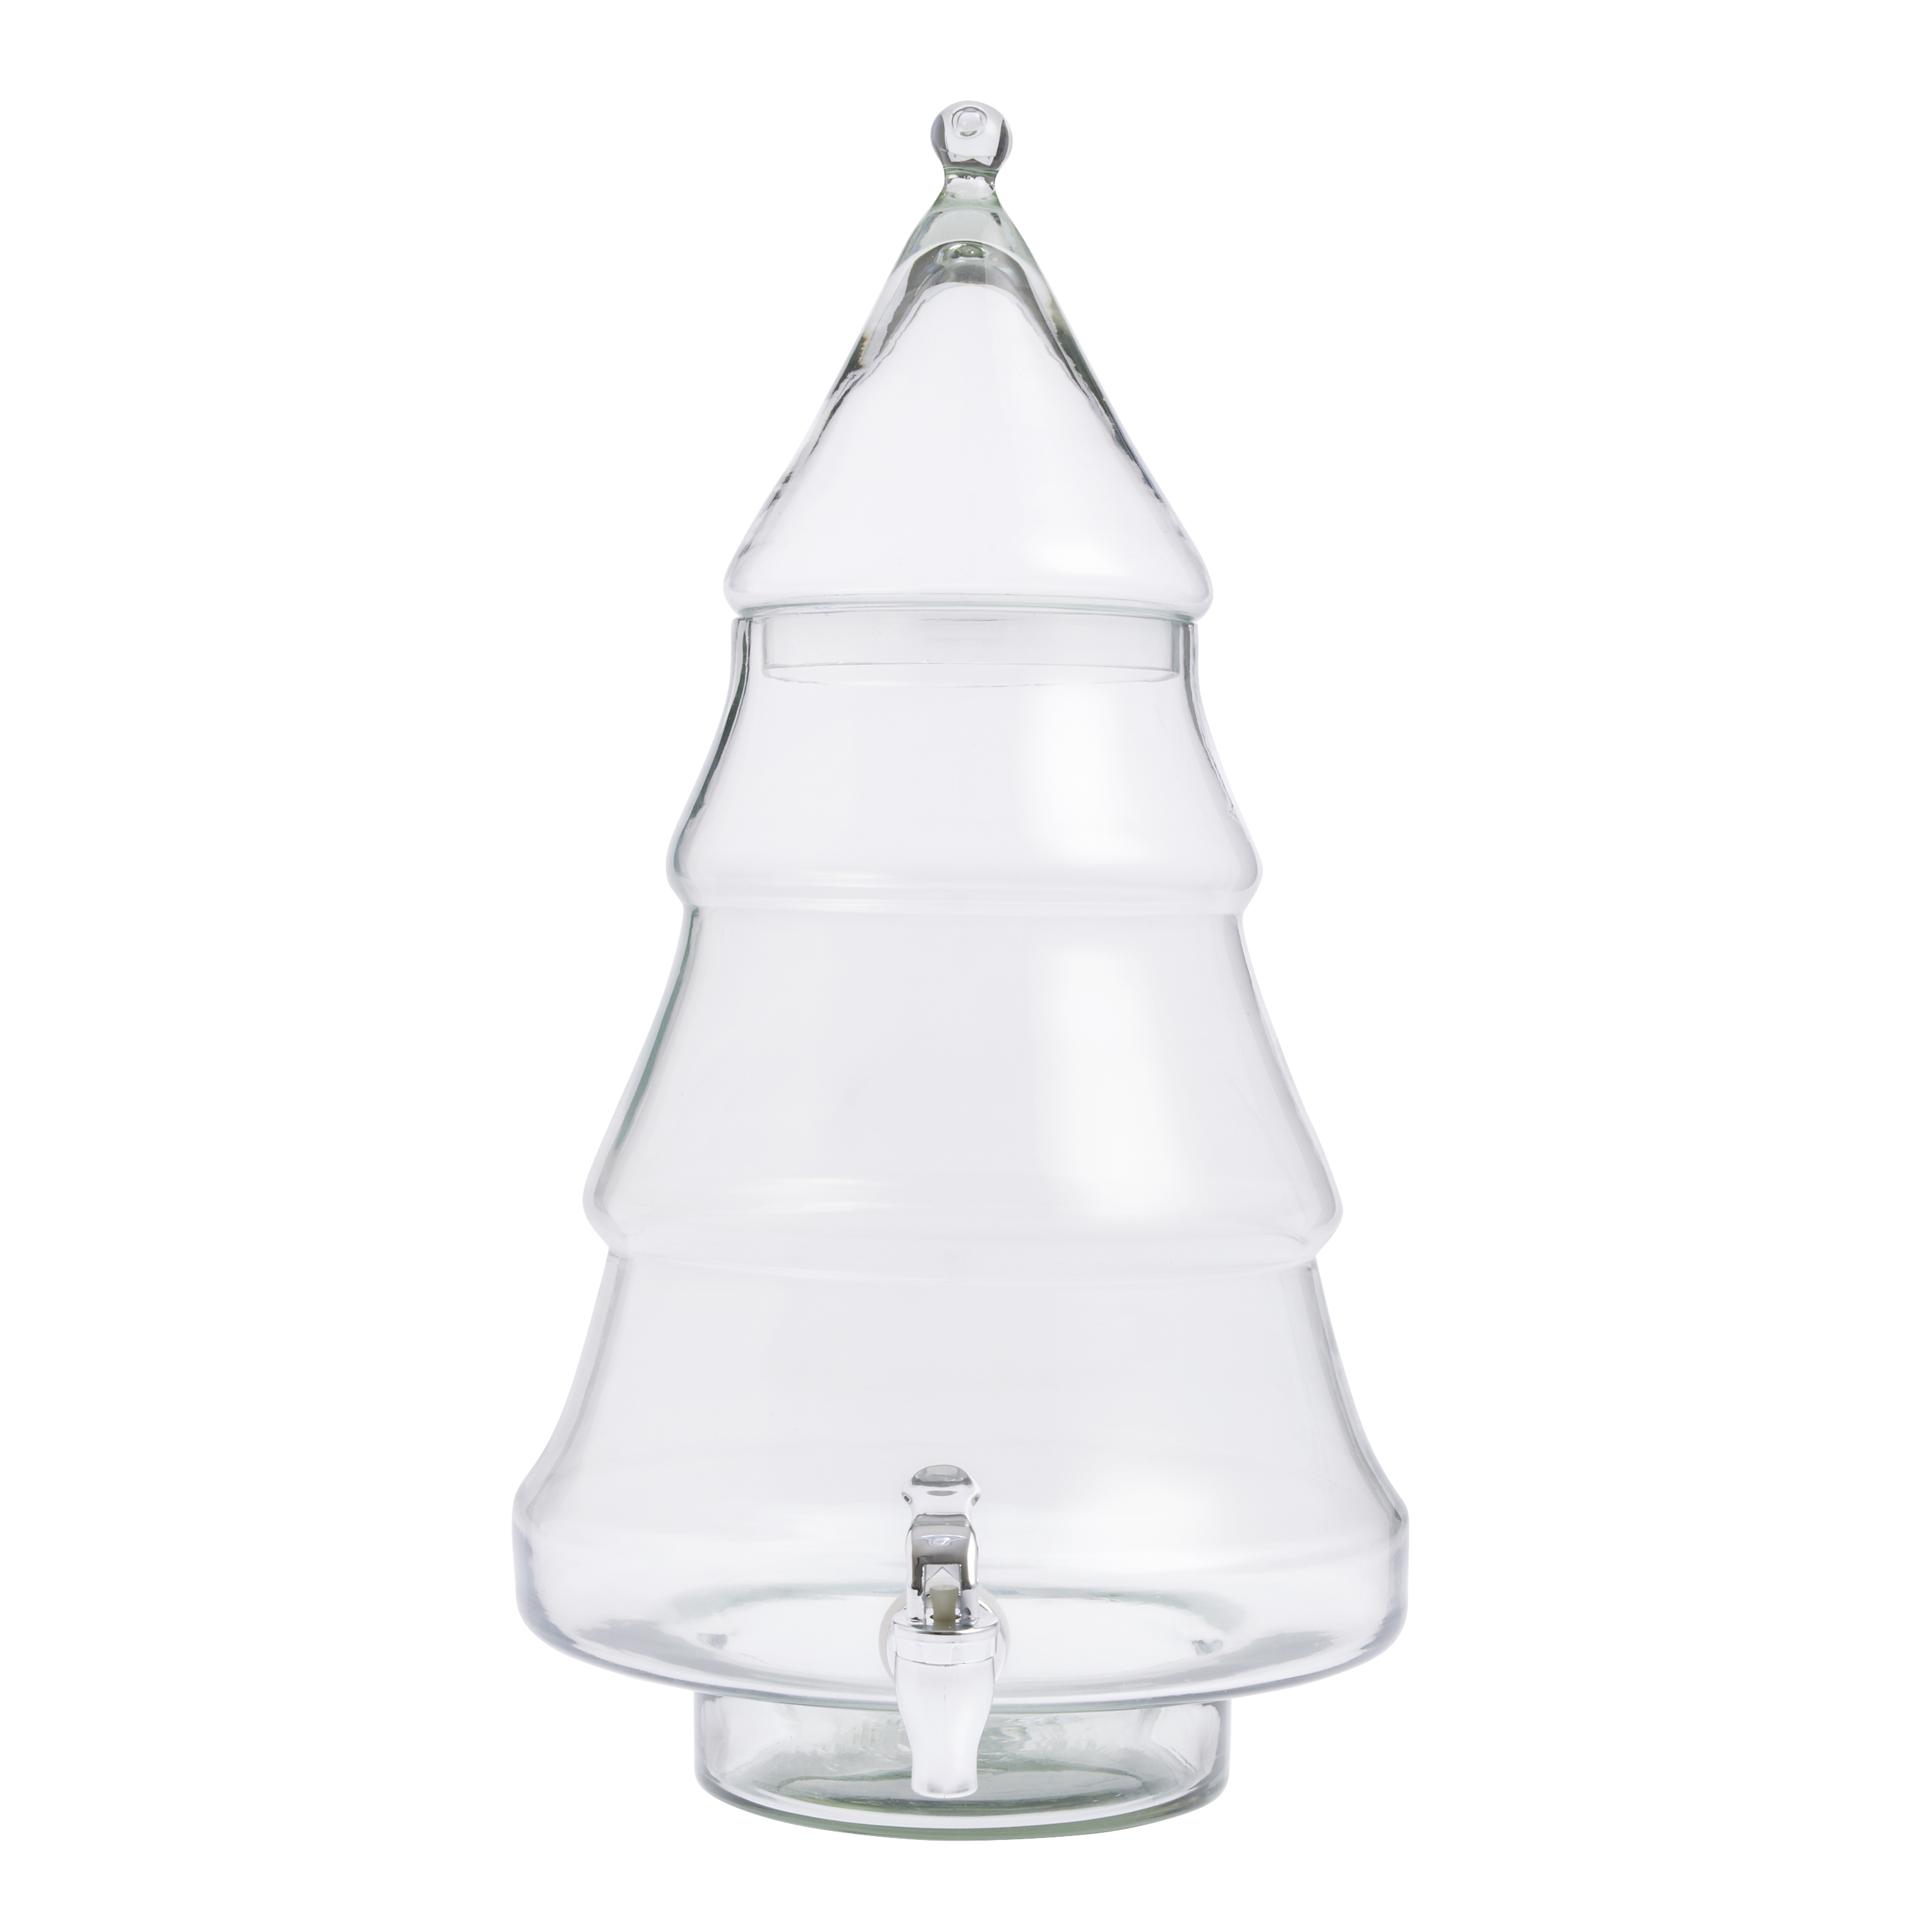 Classic Crystal Beverage Dispensers - Iron Accents